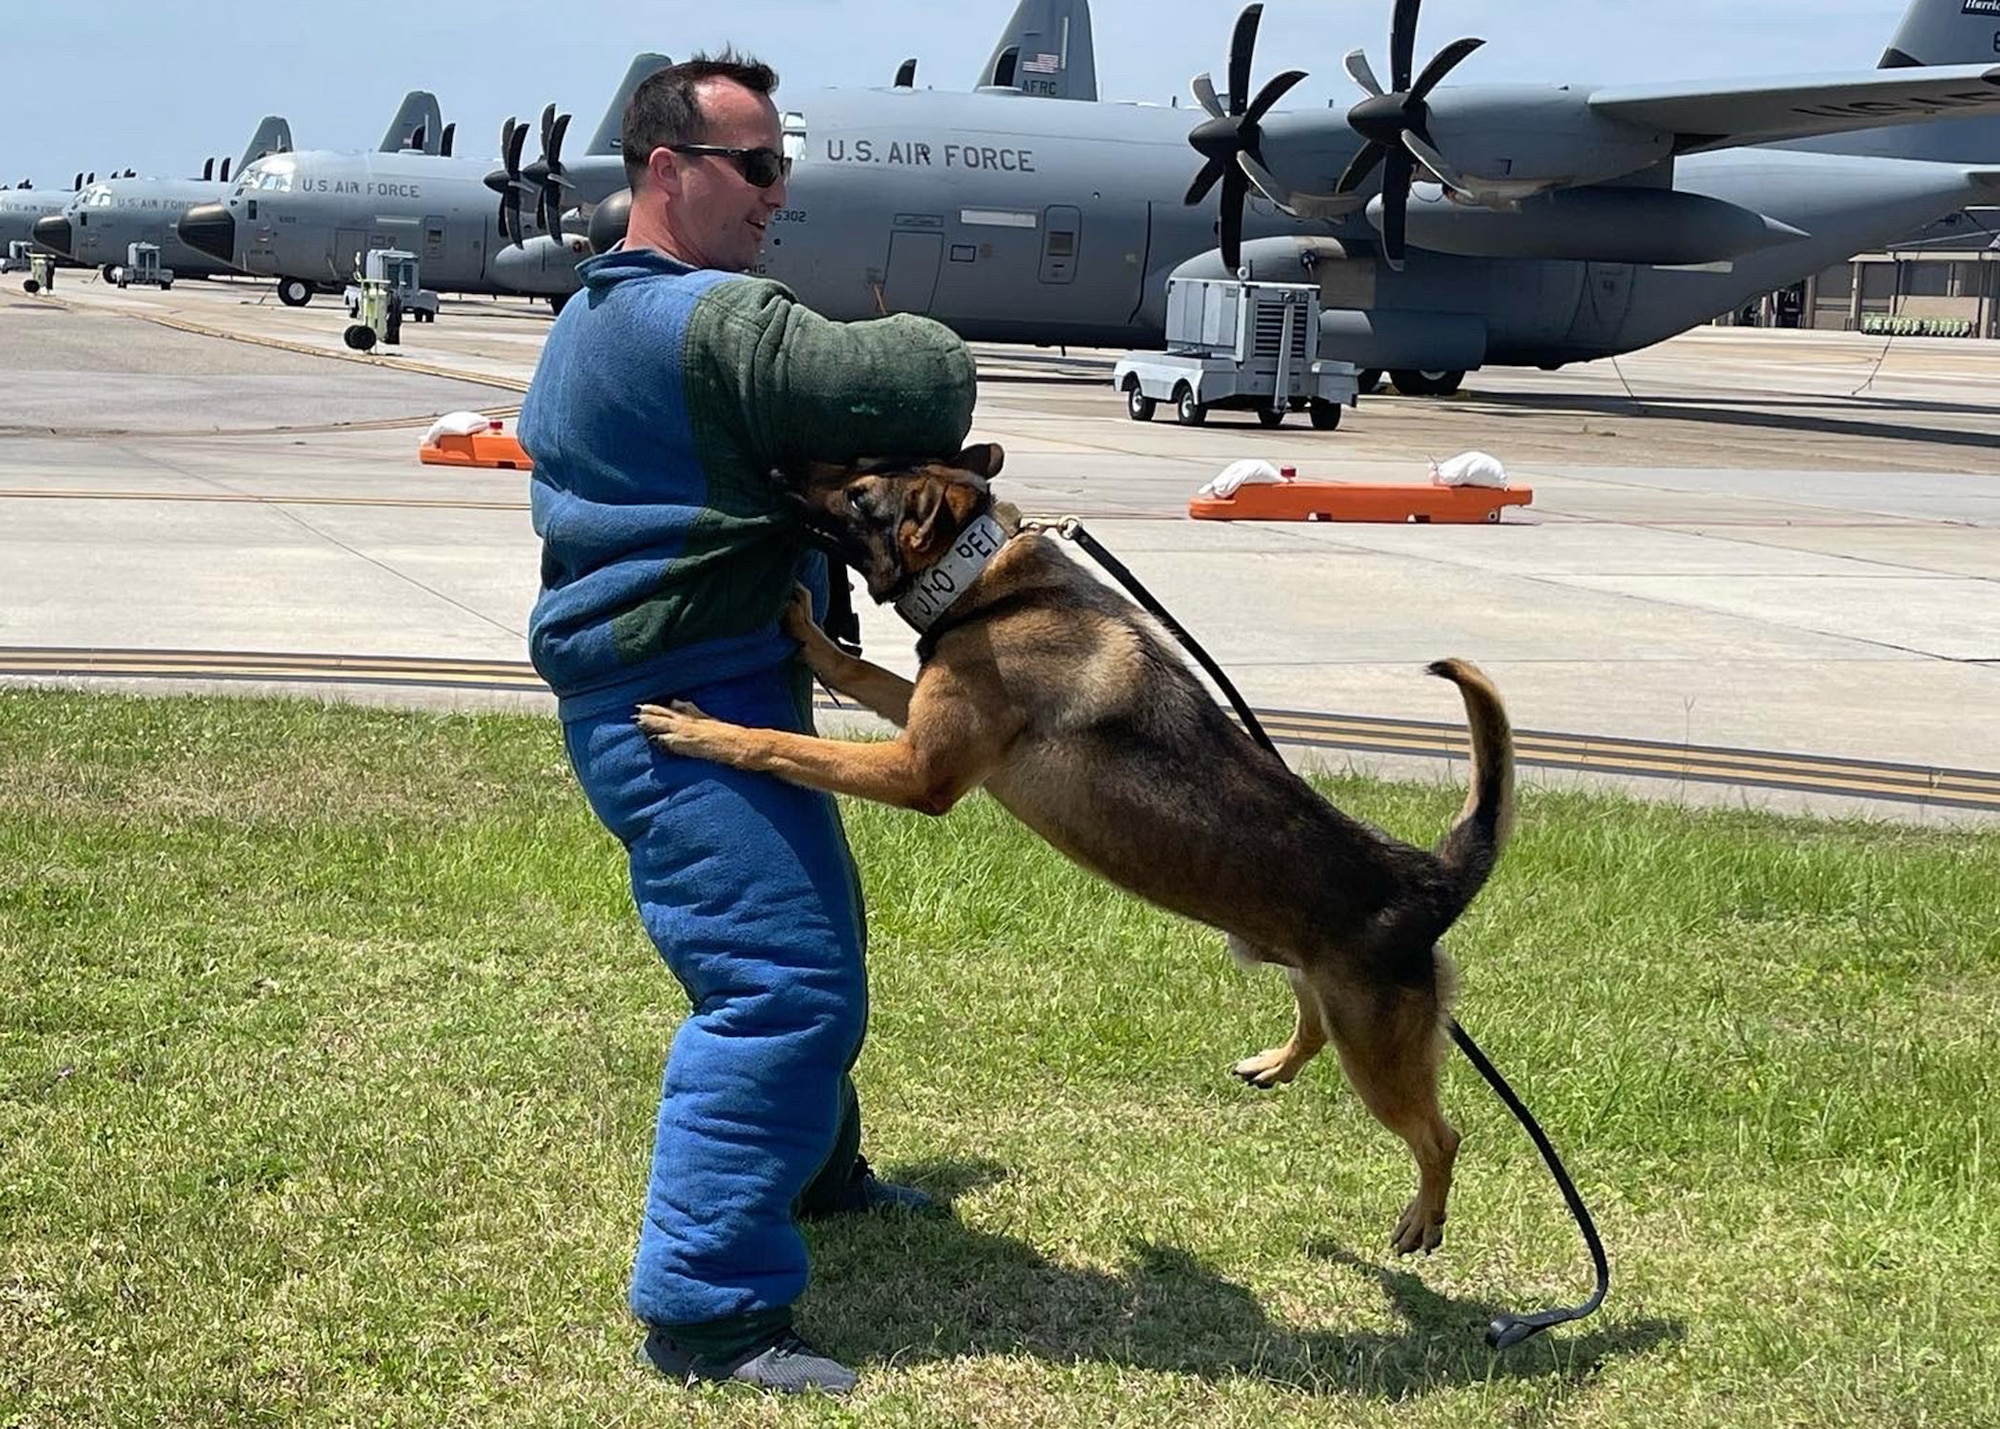 A military working dog attacks its handler, who is dressed in deterrent garb. Airplanes in the background.